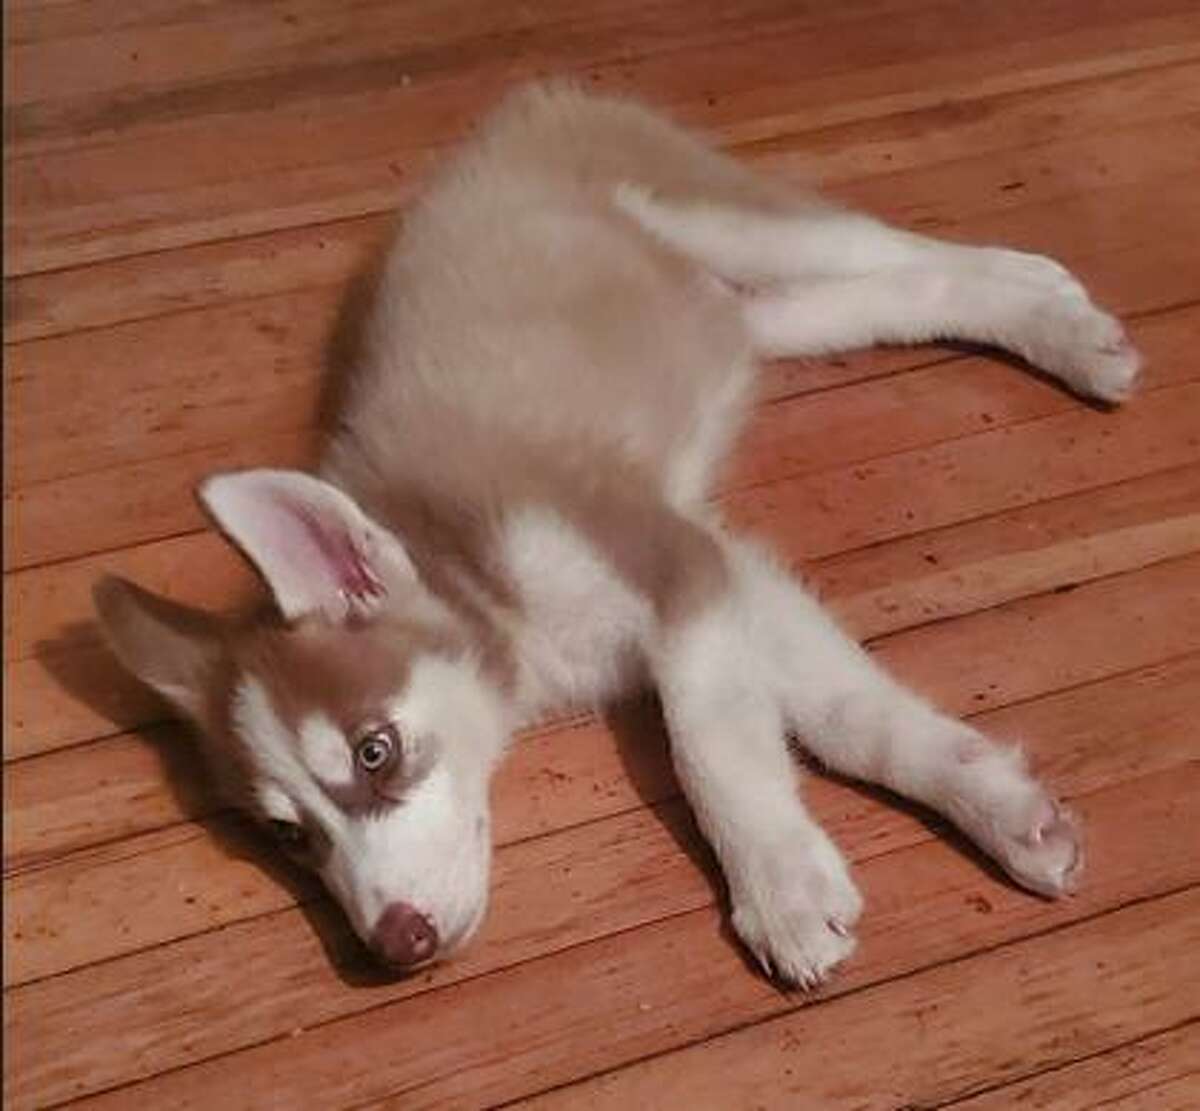 Police are searching for this husky puppy, stolen from a Norwalk man in Bridgeport Wednesday.